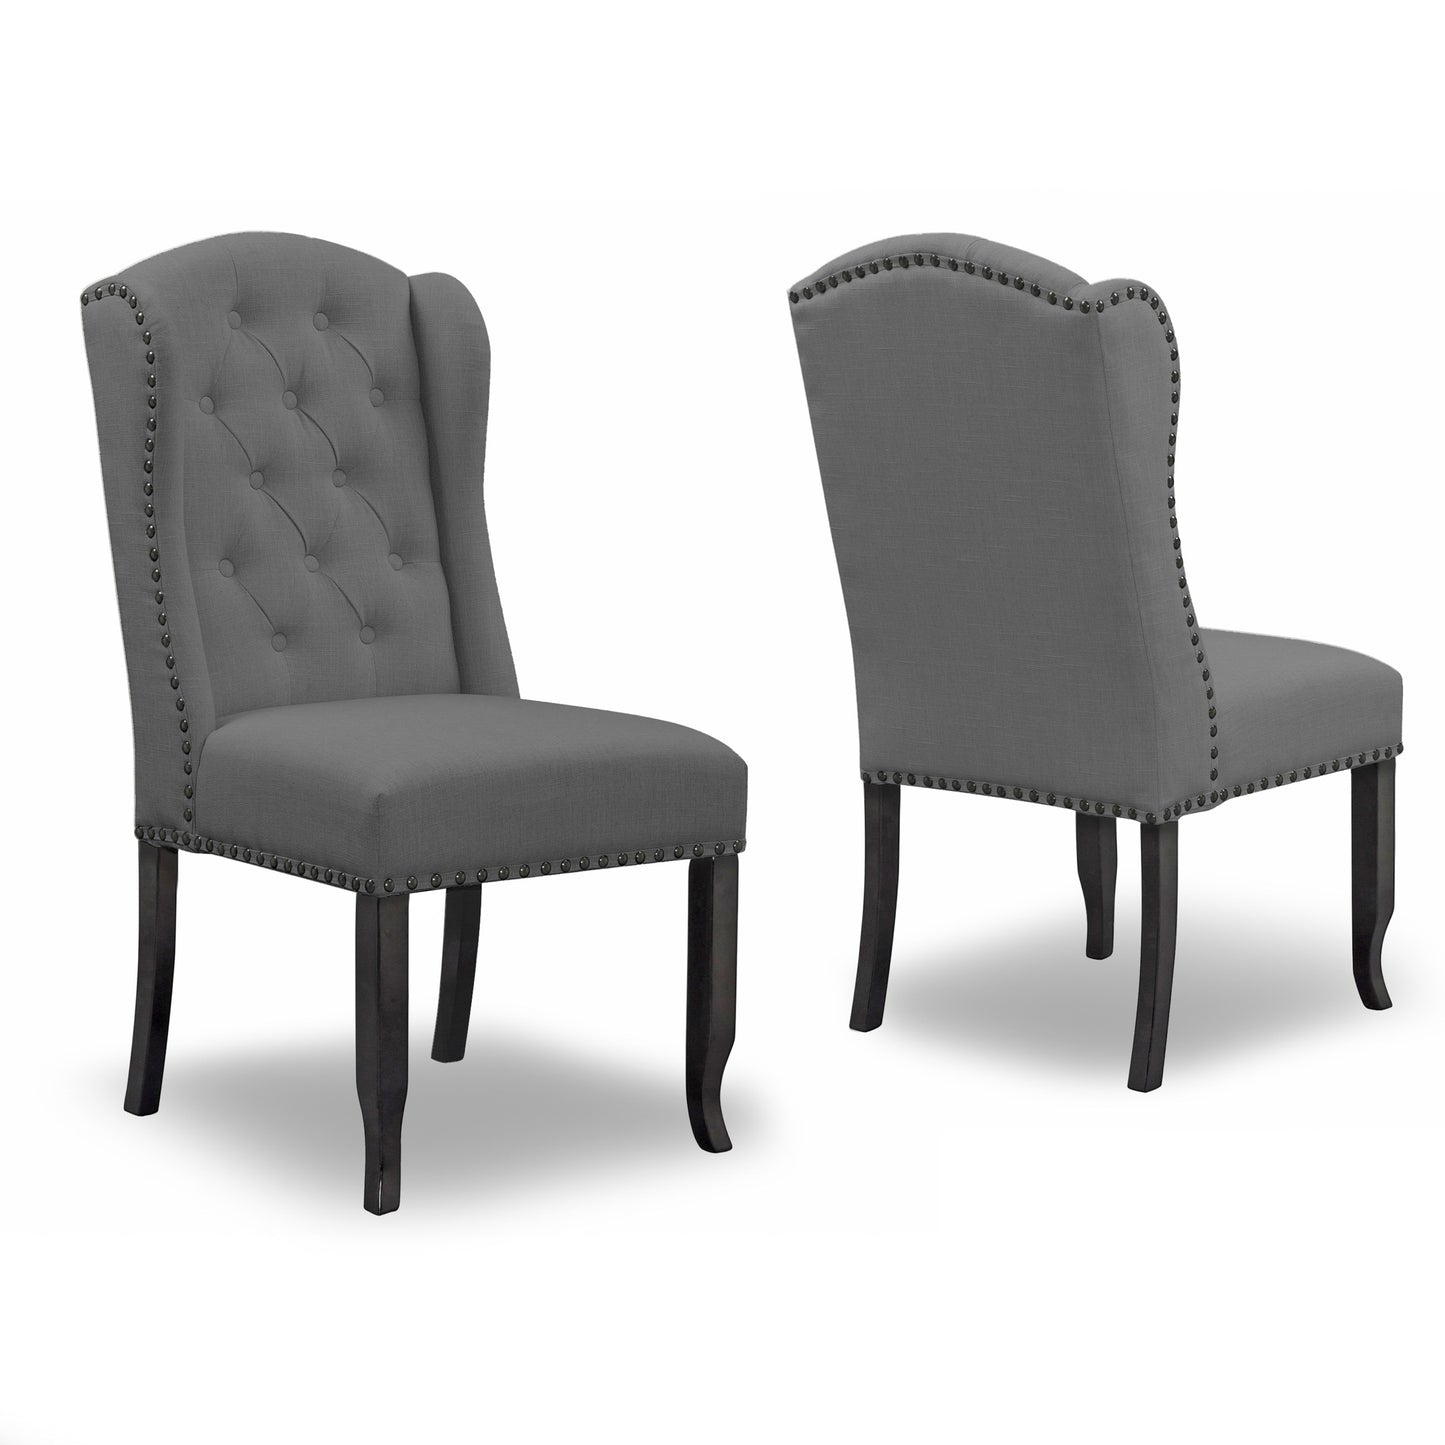 Set of 2 Alen Grey Fabric Dining Chair Wing Chair with Tufted Buttons and Nail Heads